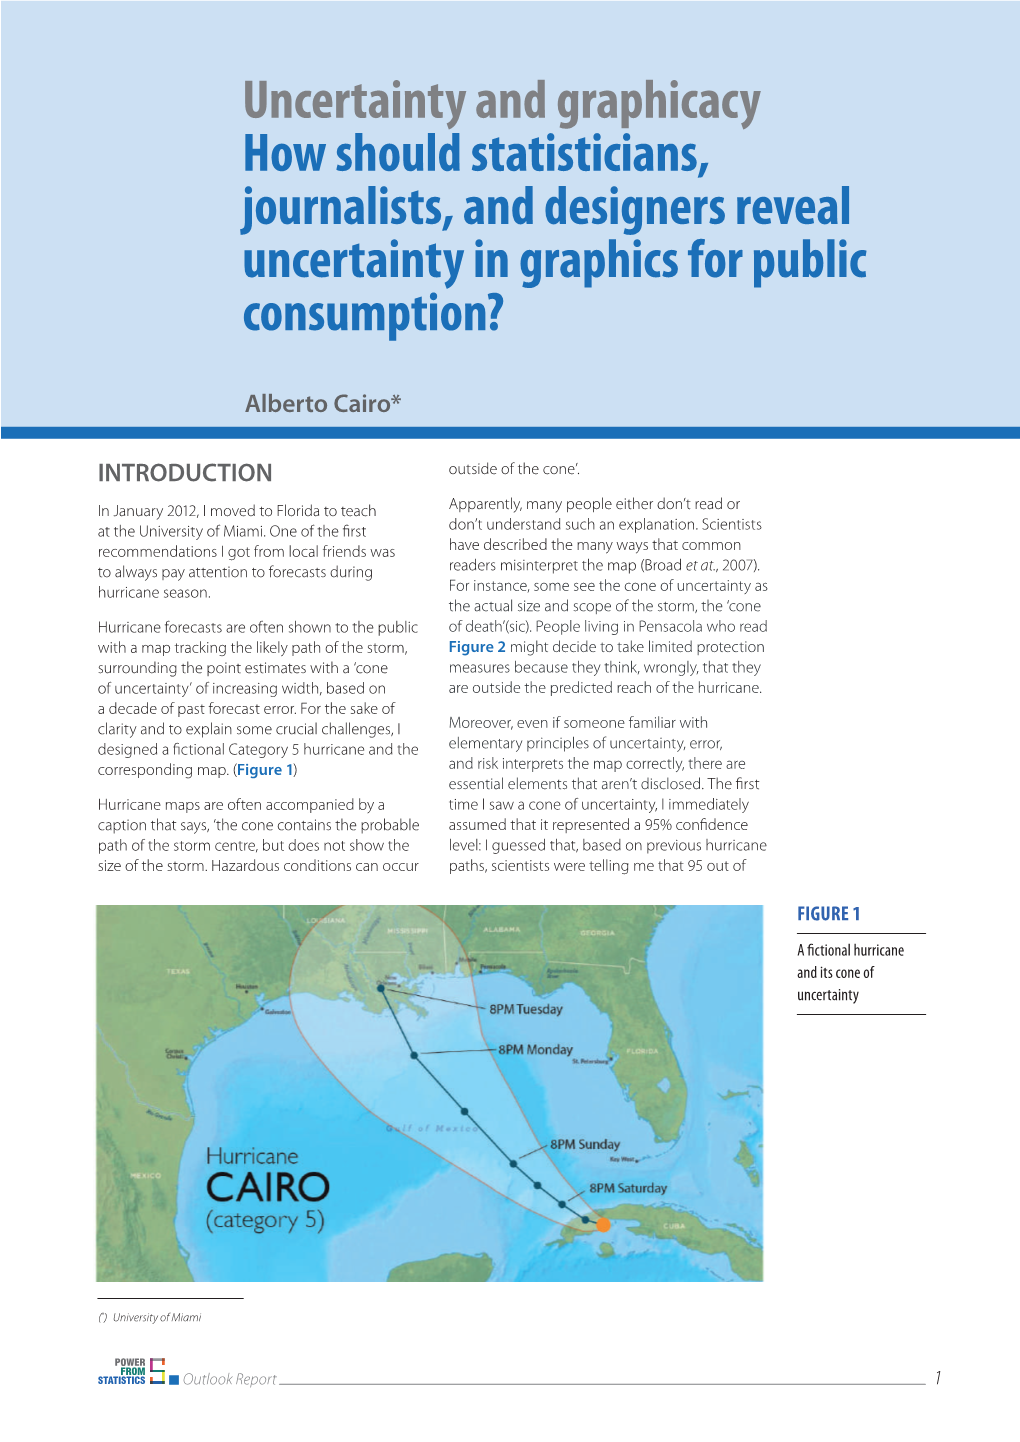 Uncertainty and Graphicacy How Should Statisticians, Journalists, and Designers Reveal Uncertainty in Graphics for Public Consumption?